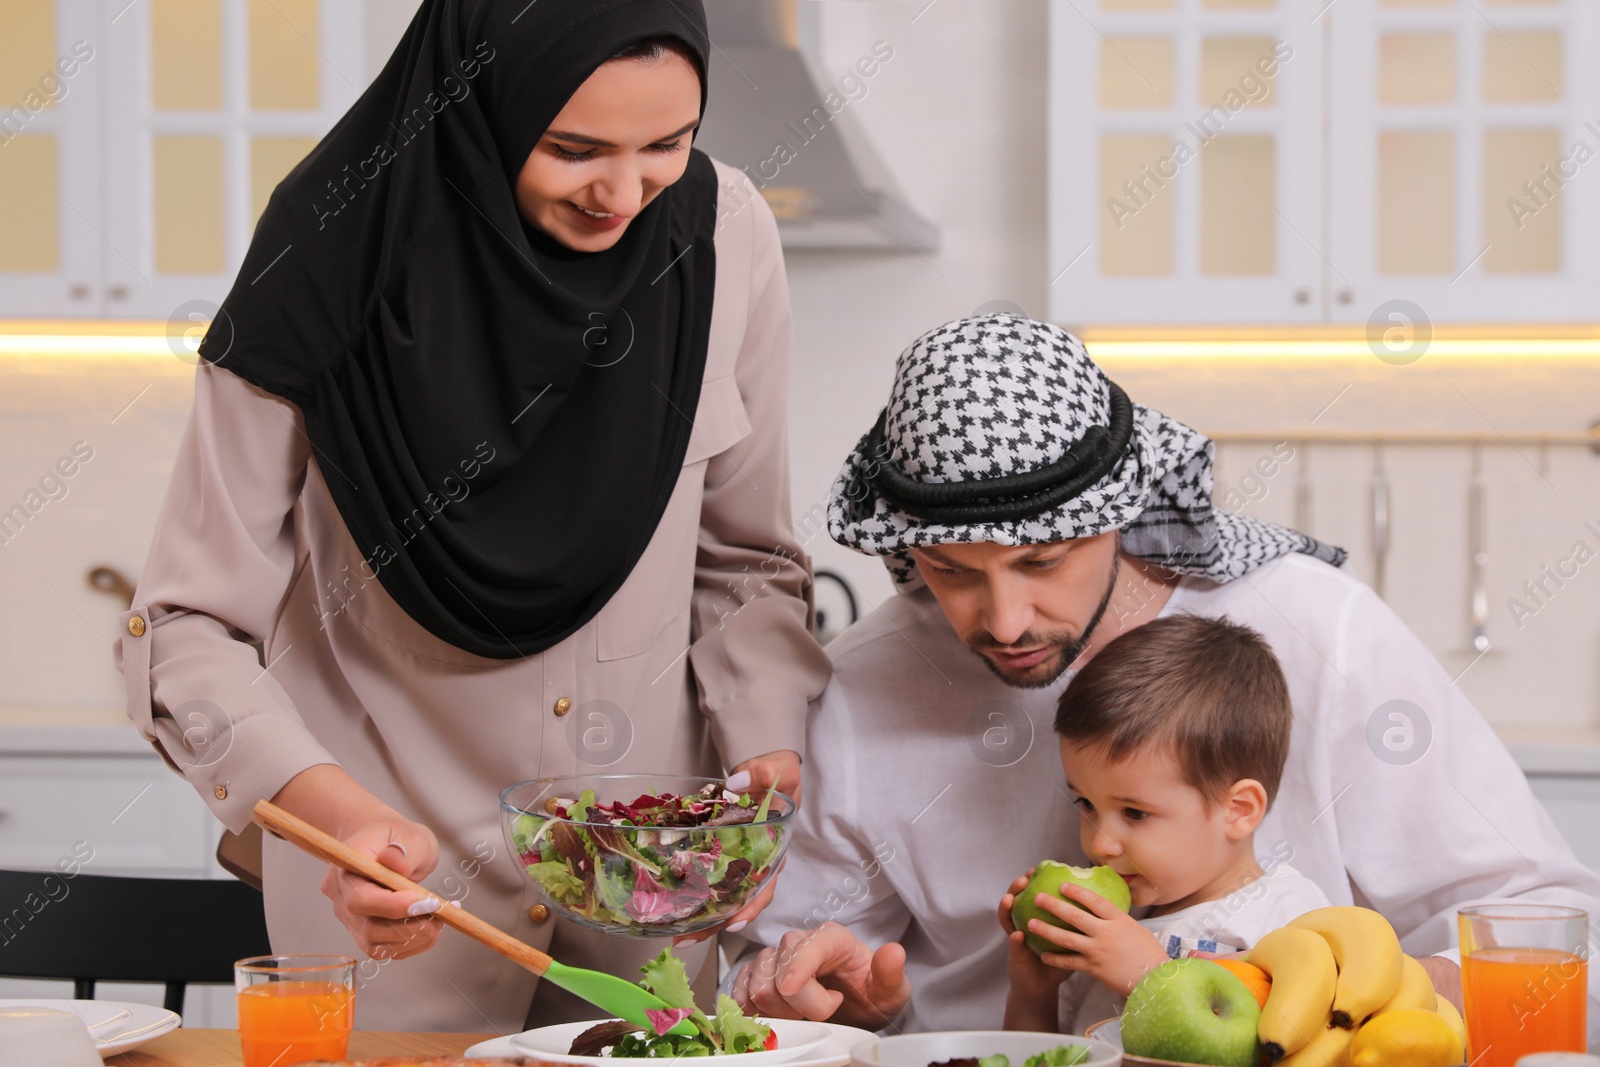 Photo of Happy Muslim family eating together in kitchen